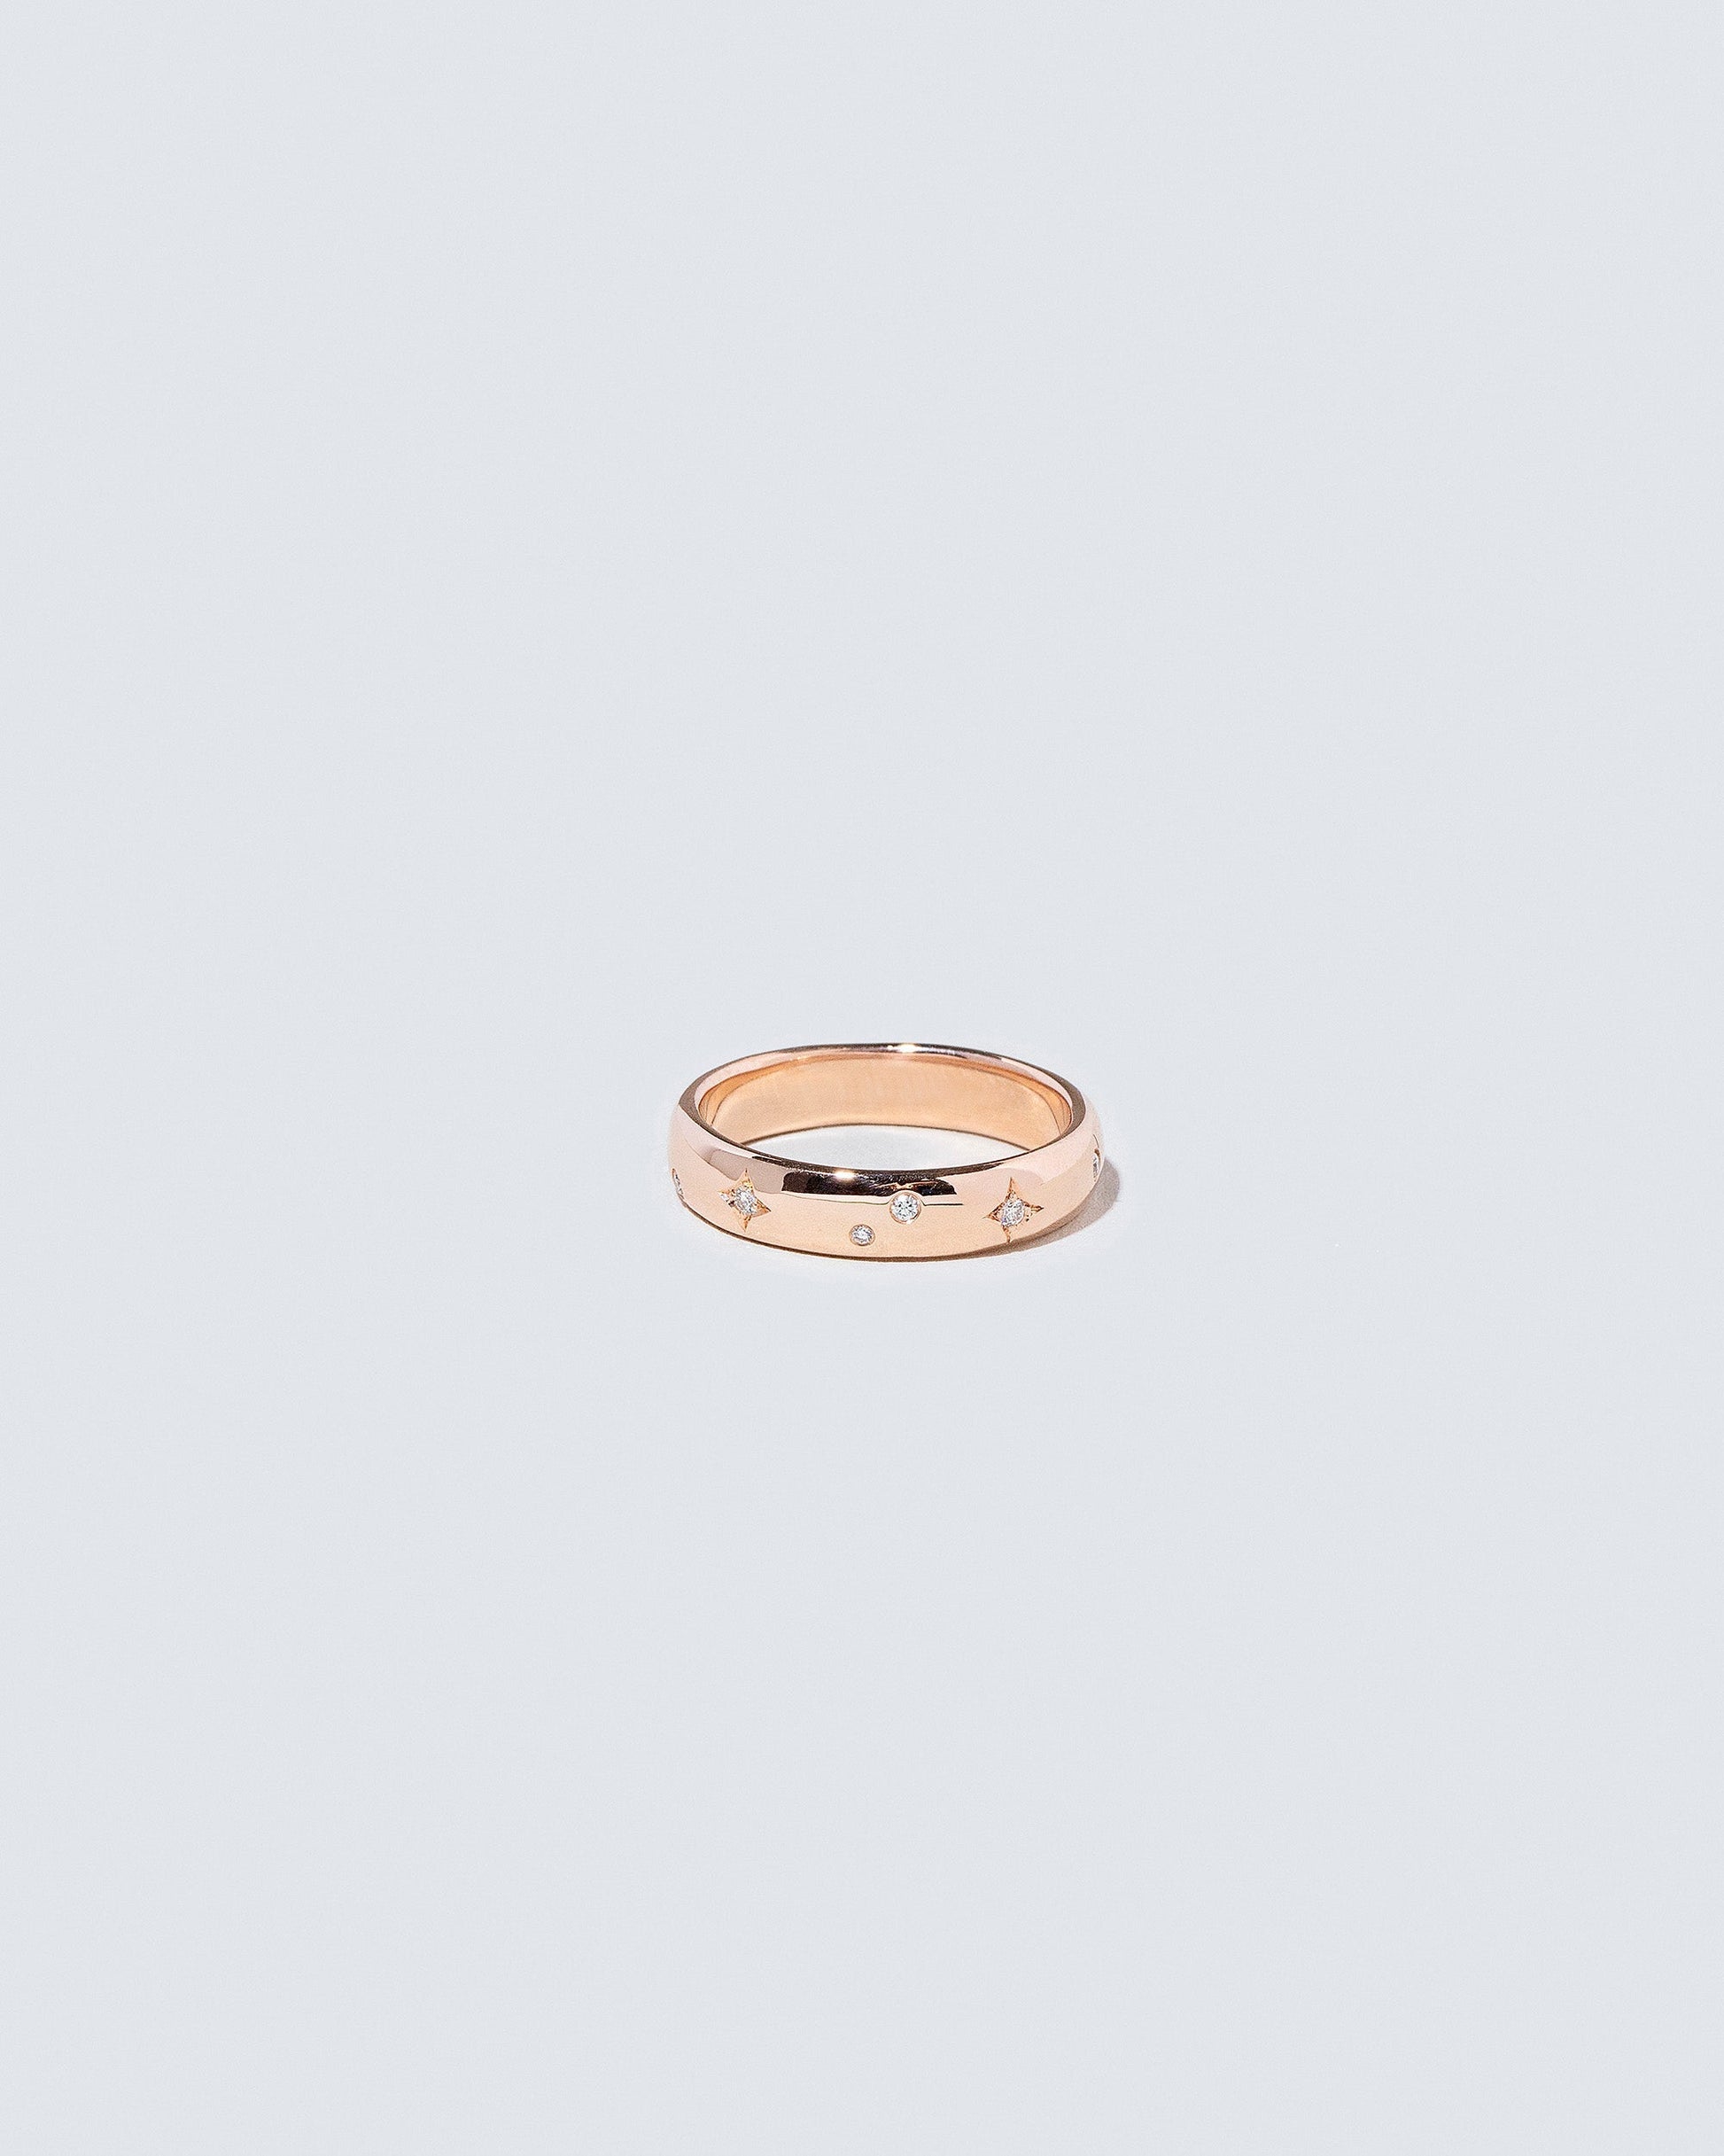  Half Round Band - 5mm in white diamond little array style on light color background.